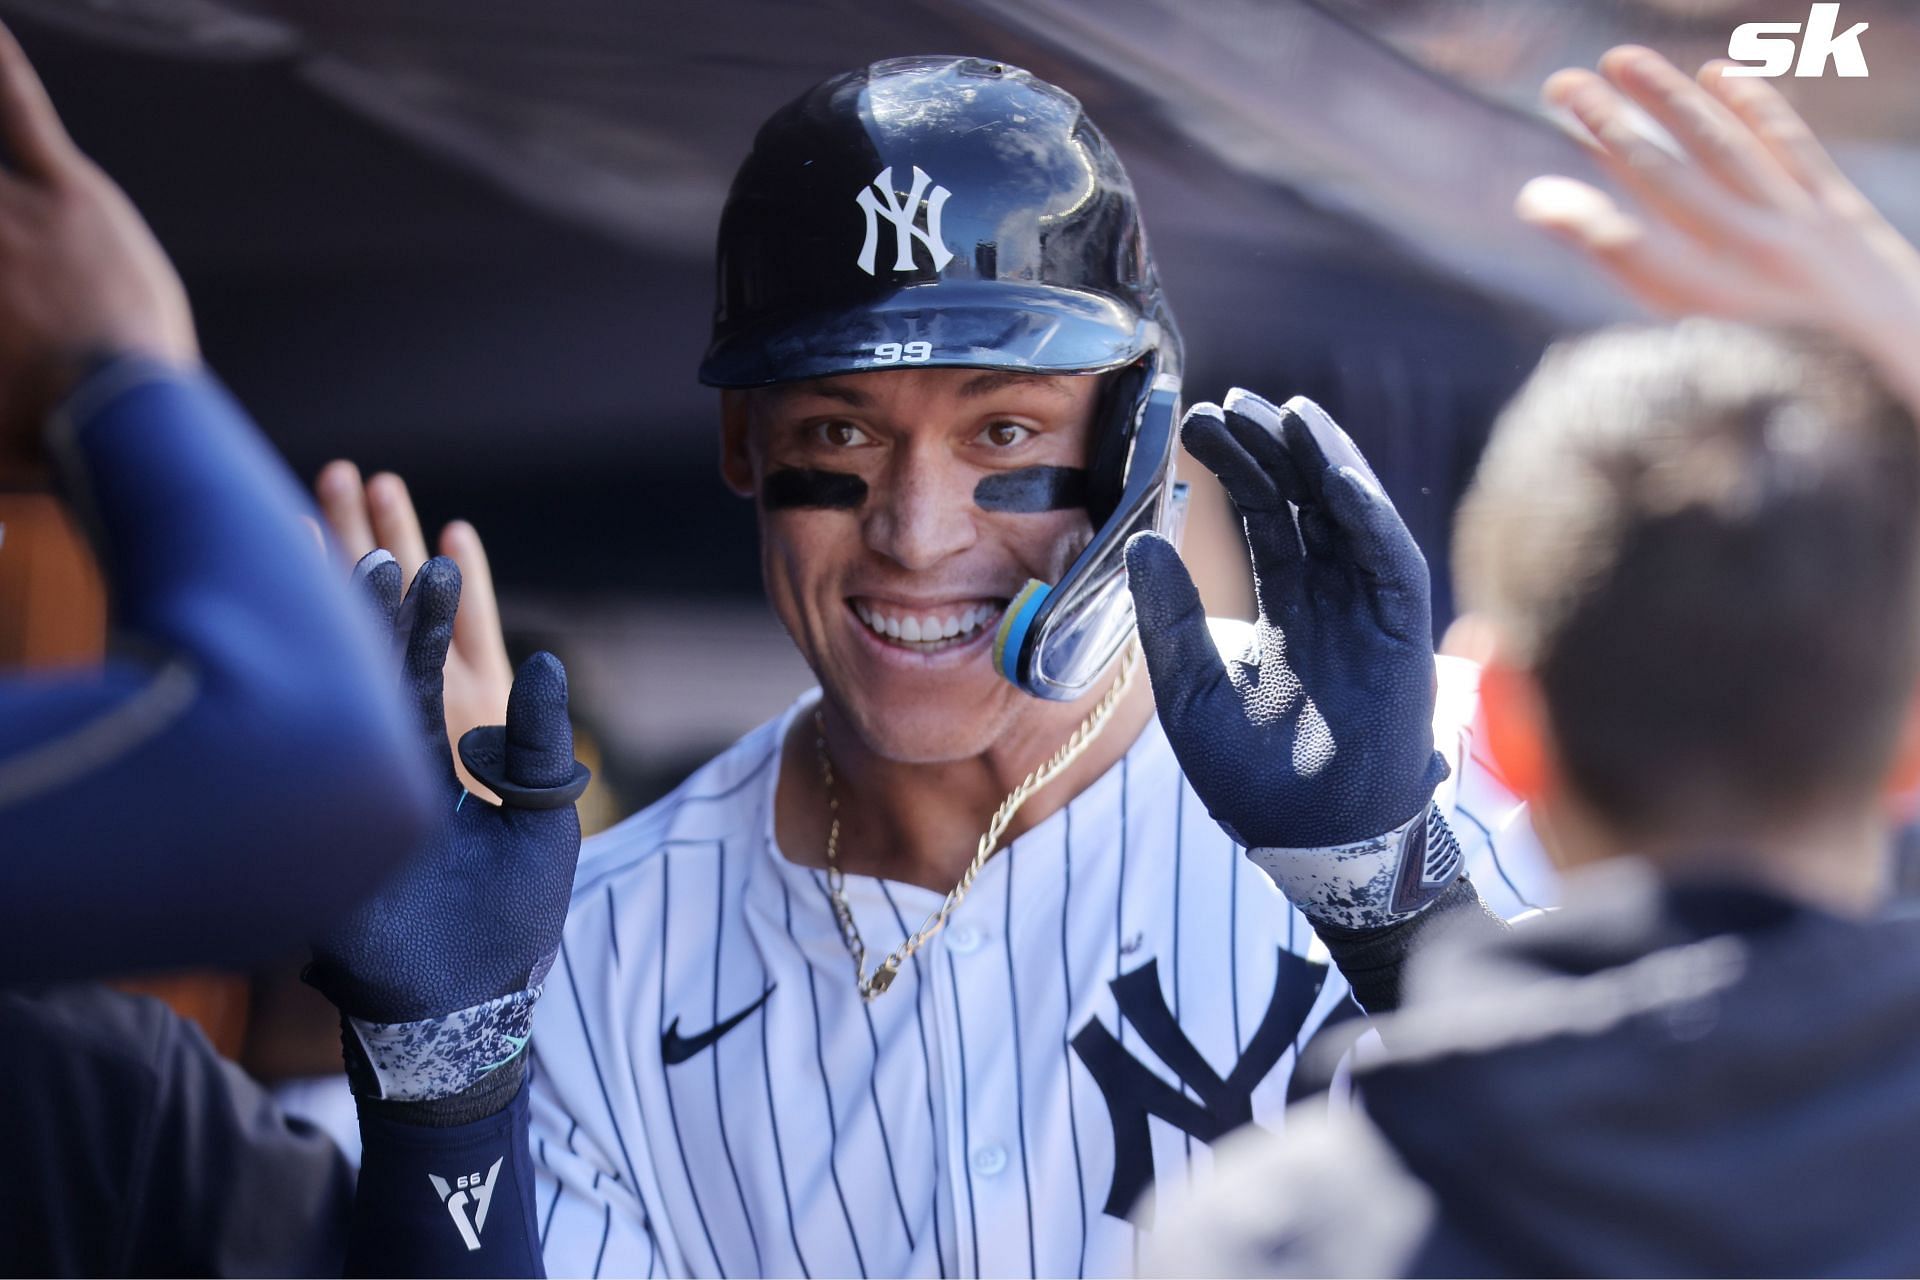 Aaron Judge talks about the healthy compeitition within the team